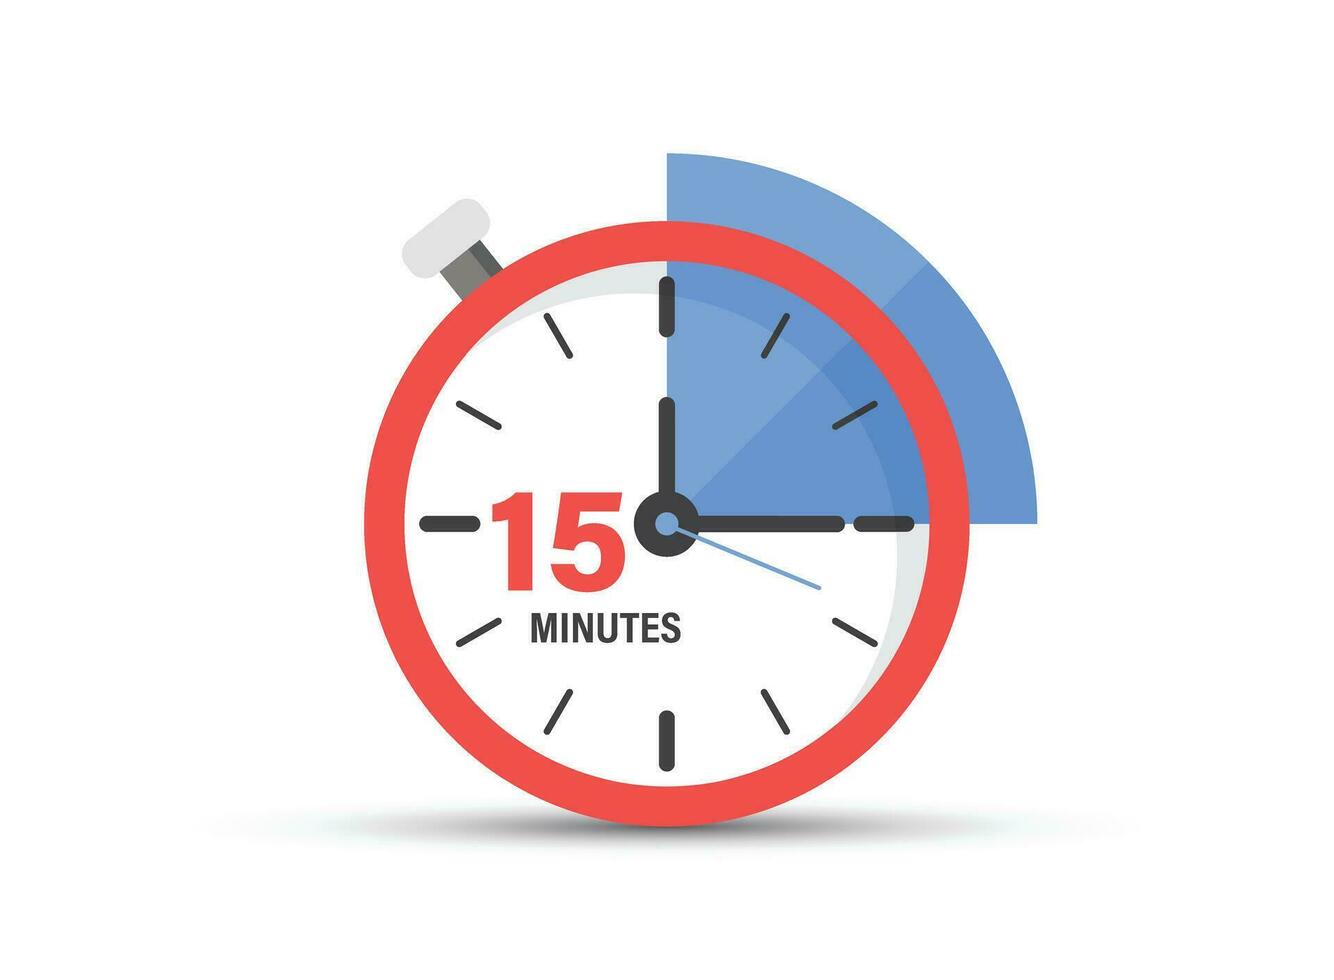 15 minutes on stopwatch icon in flat style. Clock face timer vector illustration on isolated background. Countdown sign business concept.